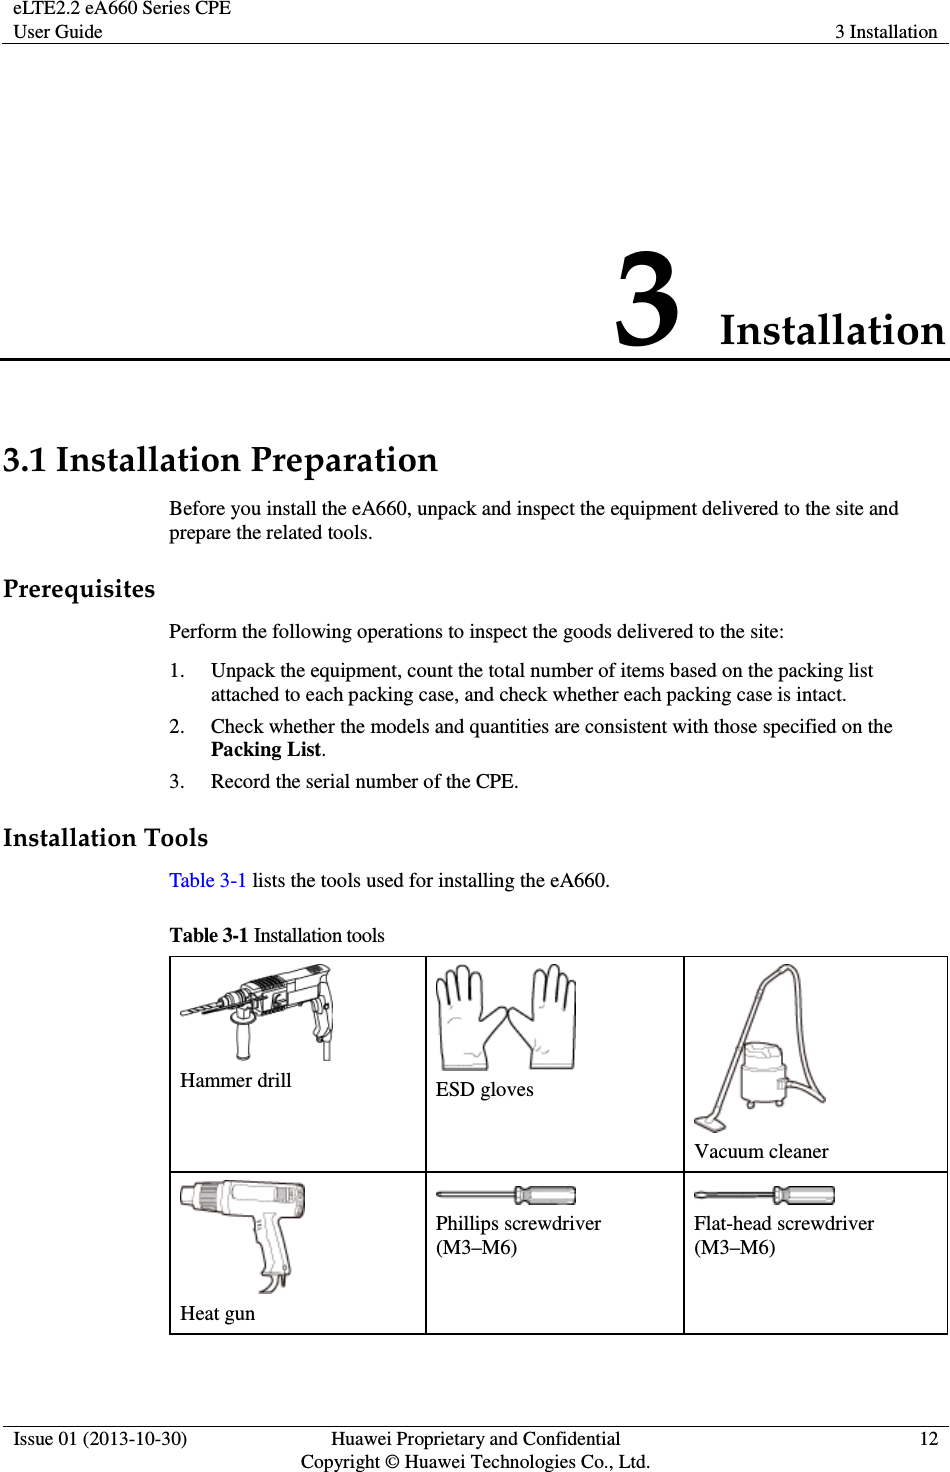 eLTE2.2 eA660 Series CPE User Guide  3 Installation  Issue 01 (2013-10-30)  Huawei Proprietary and Confidential                                     Copyright © Huawei Technologies Co., Ltd. 12  3 Installation 3.1 Installation Preparation Before you install the eA660, unpack and inspect the equipment delivered to the site and prepare the related tools. Prerequisites Perform the following operations to inspect the goods delivered to the site: 1. Unpack the equipment, count the total number of items based on the packing list attached to each packing case, and check whether each packing case is intact.   2. Check whether the models and quantities are consistent with those specified on the Packing List. 3. Record the serial number of the CPE.   Installation Tools Table 3-1 lists the tools used for installing the eA660. Table 3-1 Installation tools  Hammer drill   ESD gloves  Vacuum cleaner  Heat gun  Phillips screwdriver (M3–M6)  Flat-head screwdriver (M3–M6) 